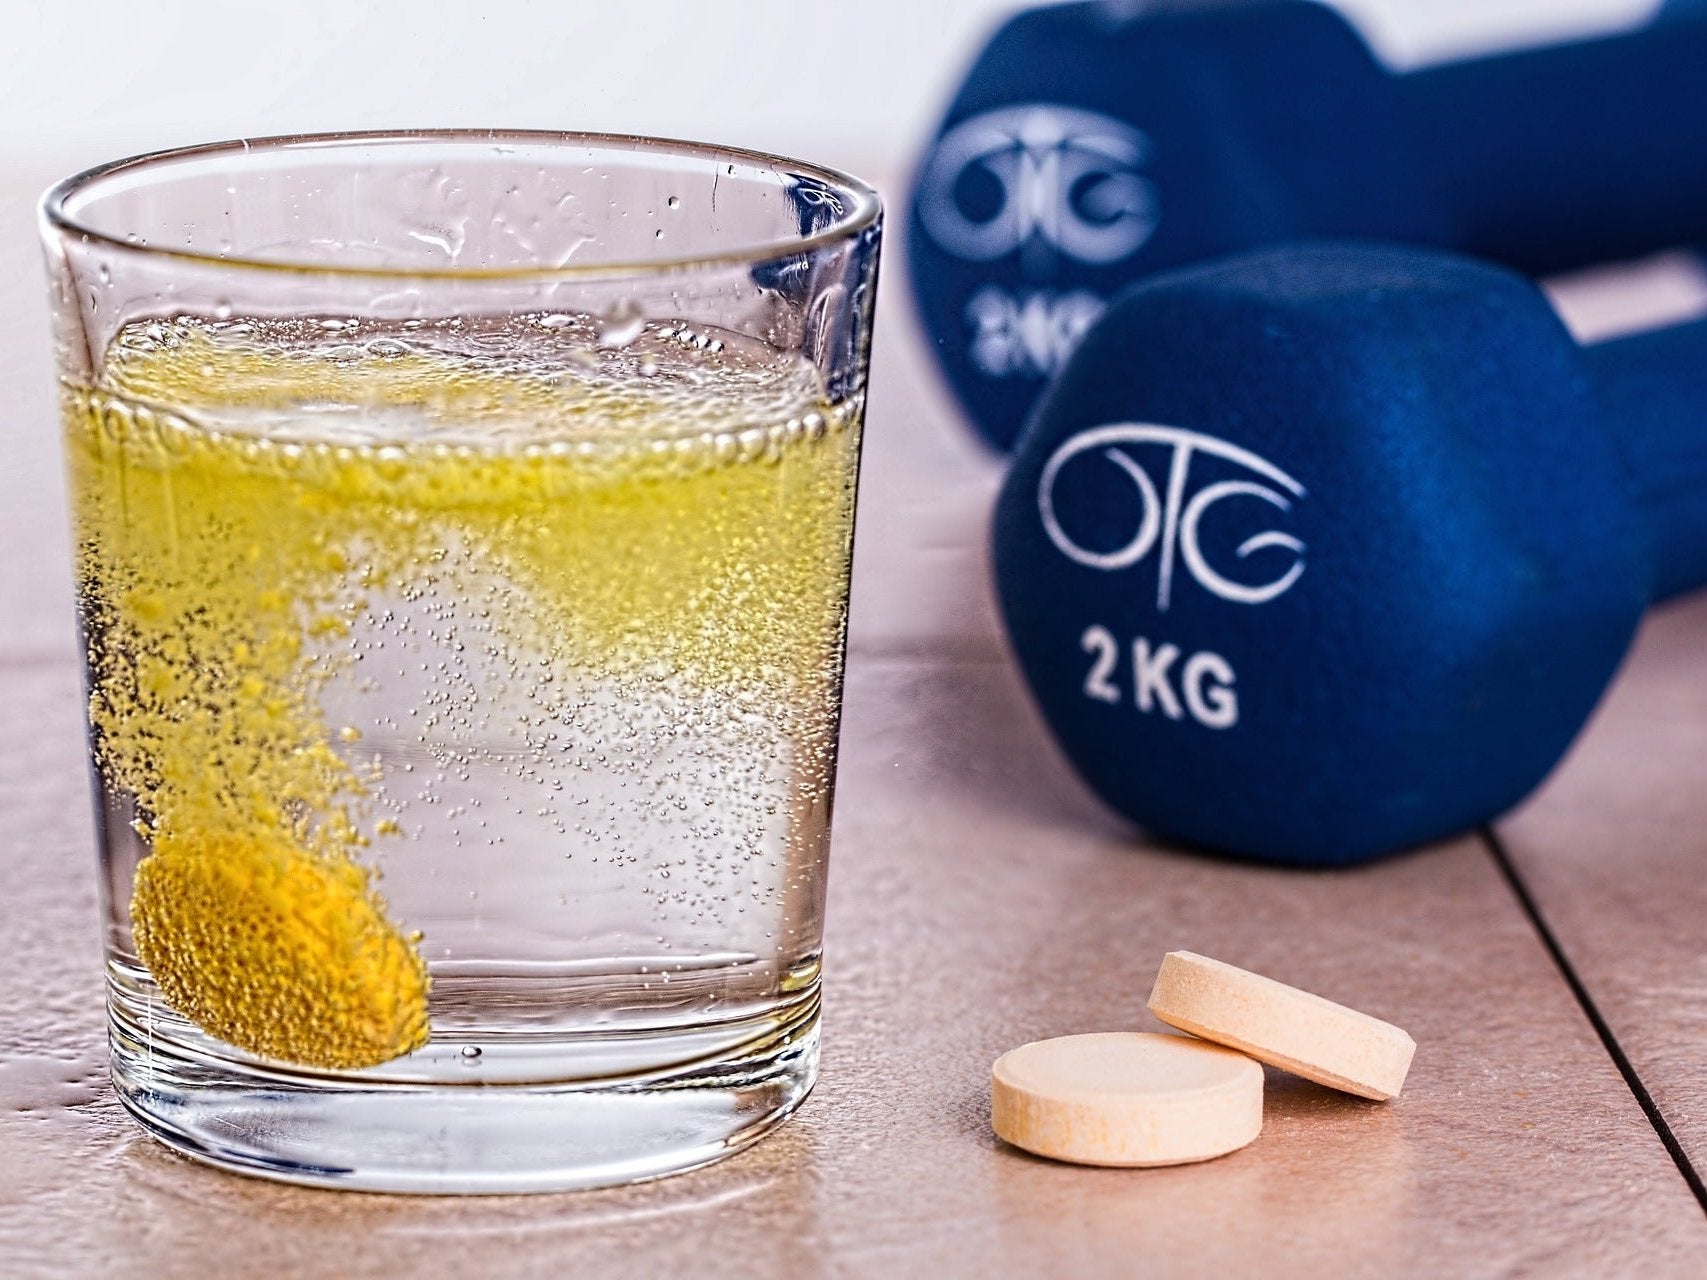 Which vitamins and minerals are important for athletes?